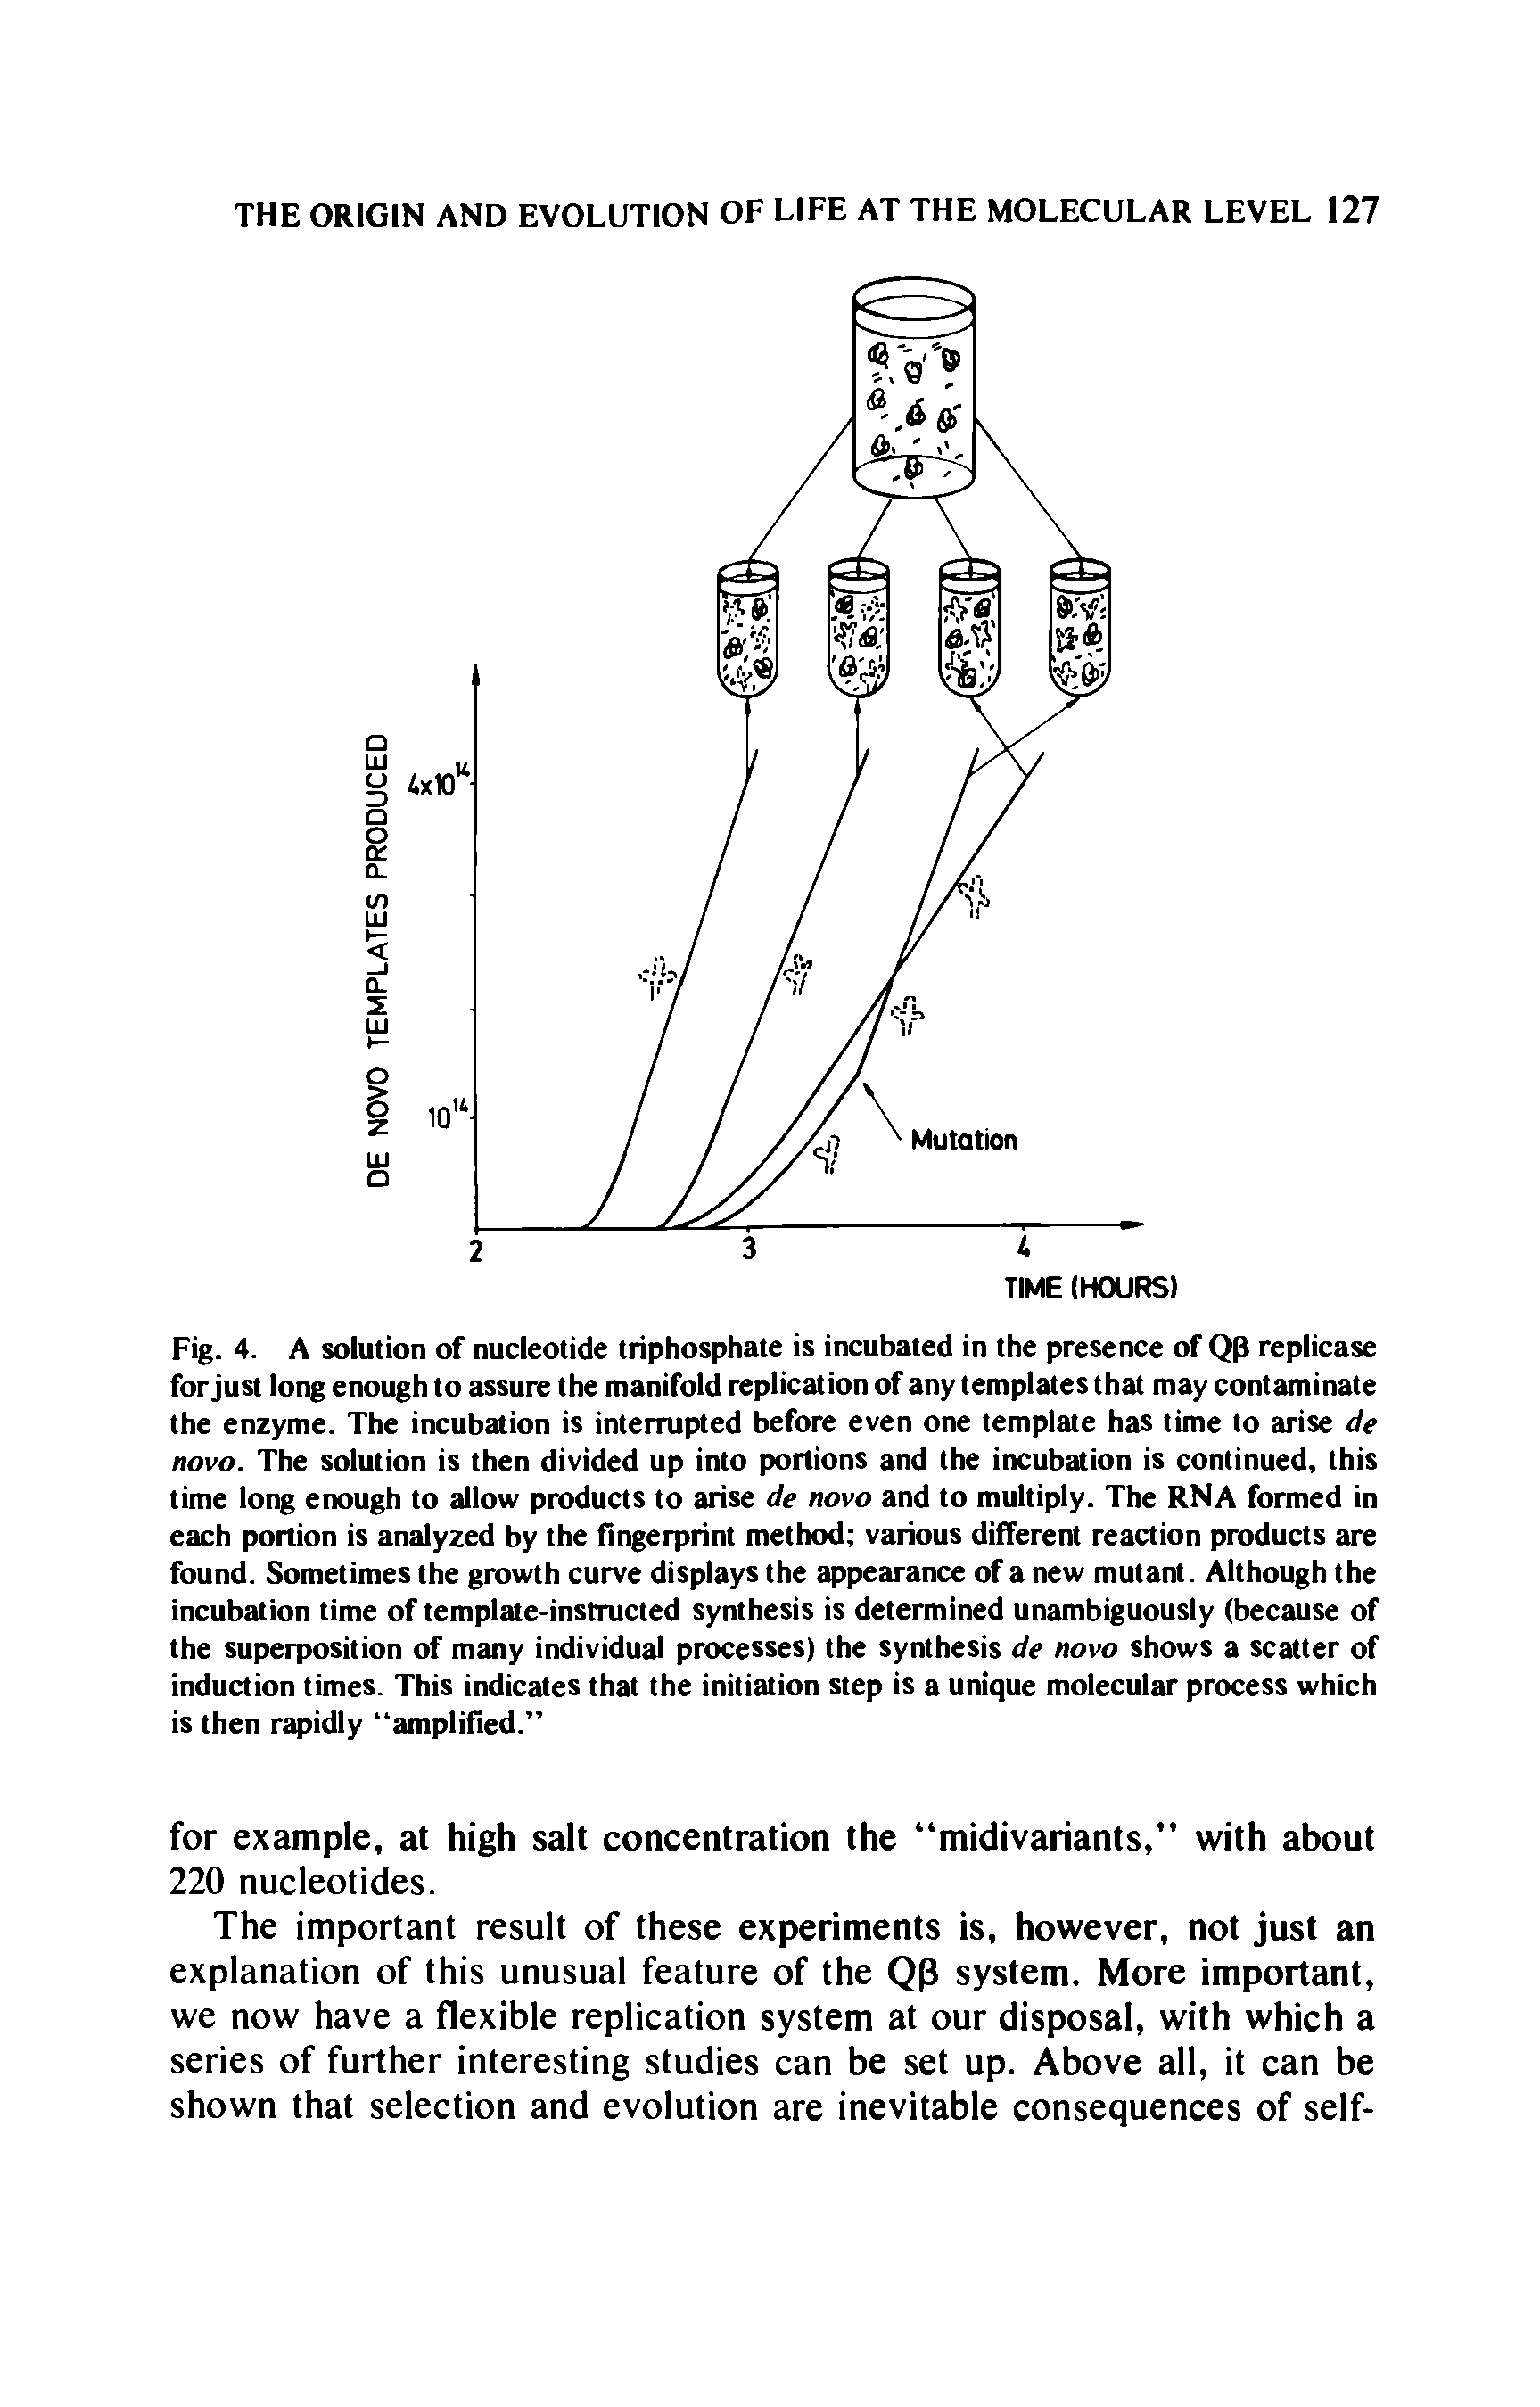 Fig. 4. A solution of nucleotide triphosphate is incubated in the presence of QP replicase for just long enough to assure the manifold replication of any templates that may contaminate the enzyme. The incubation is interrupted before even one template has time to arise de novo. The solution is then divided up into portions and the incubation is continued, this time long enough to allow products to arise de novo and to multiply. The RNA formed in each portion is analyzed by the fingerprint method various different reaction products are found. Sometimes the growth curve displays the appearance of a new mutant. Although the incubation time of template-instructed synthesis is determined unambiguously (because of the superposition of many individual processes) the synthesis de novo shows a scatter of induction times. This indicates that the initiation step is a unique molecular process which is then rapidly amplified. ...